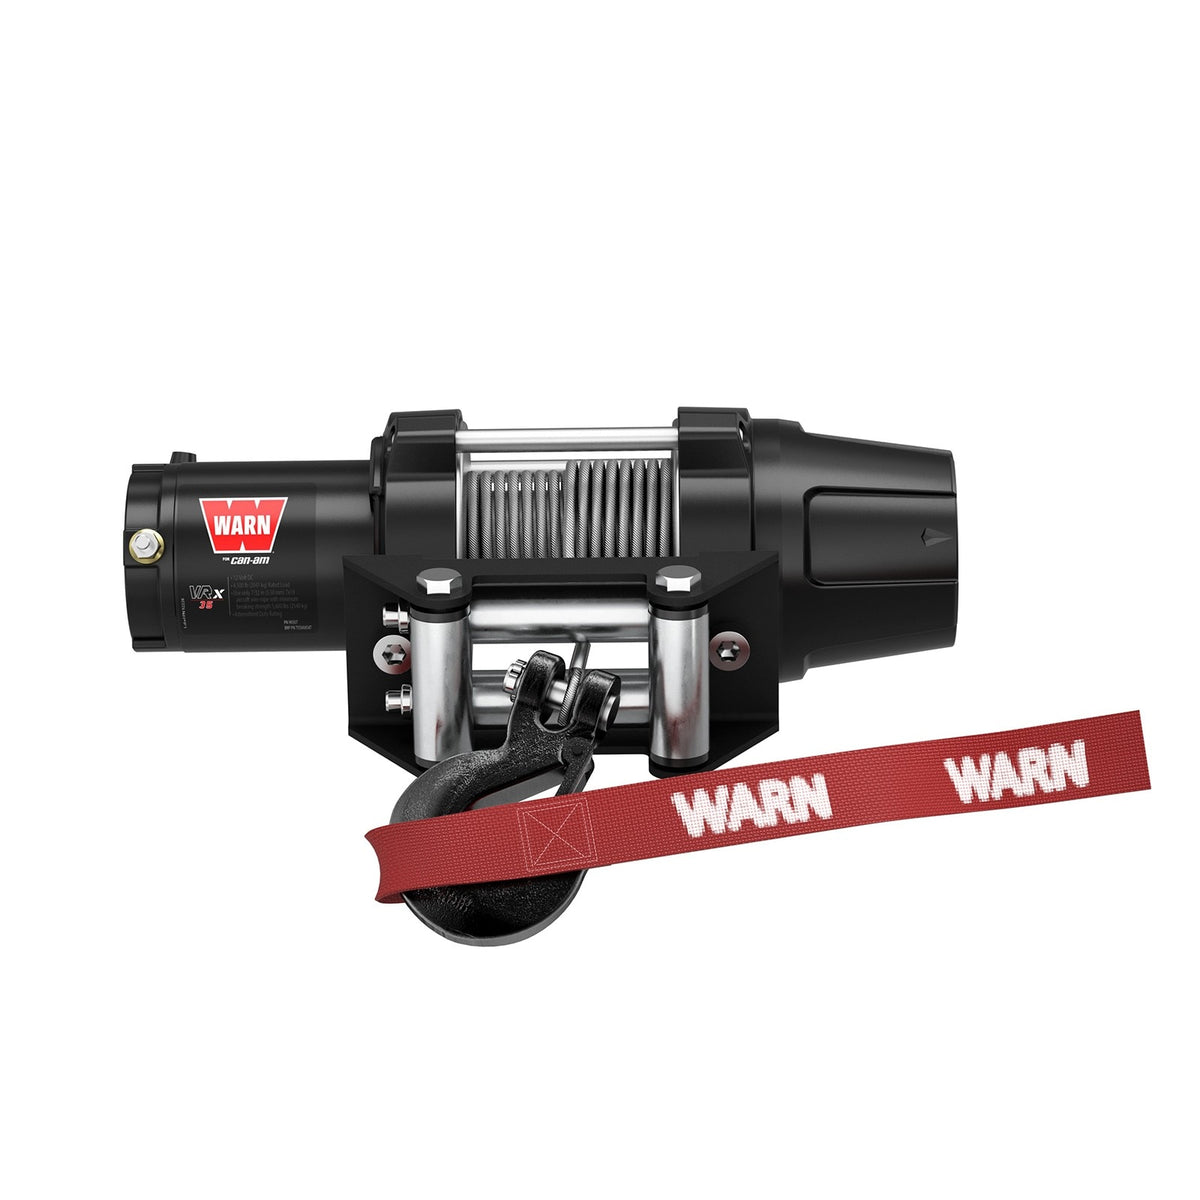 Treuil Can-Am Warn